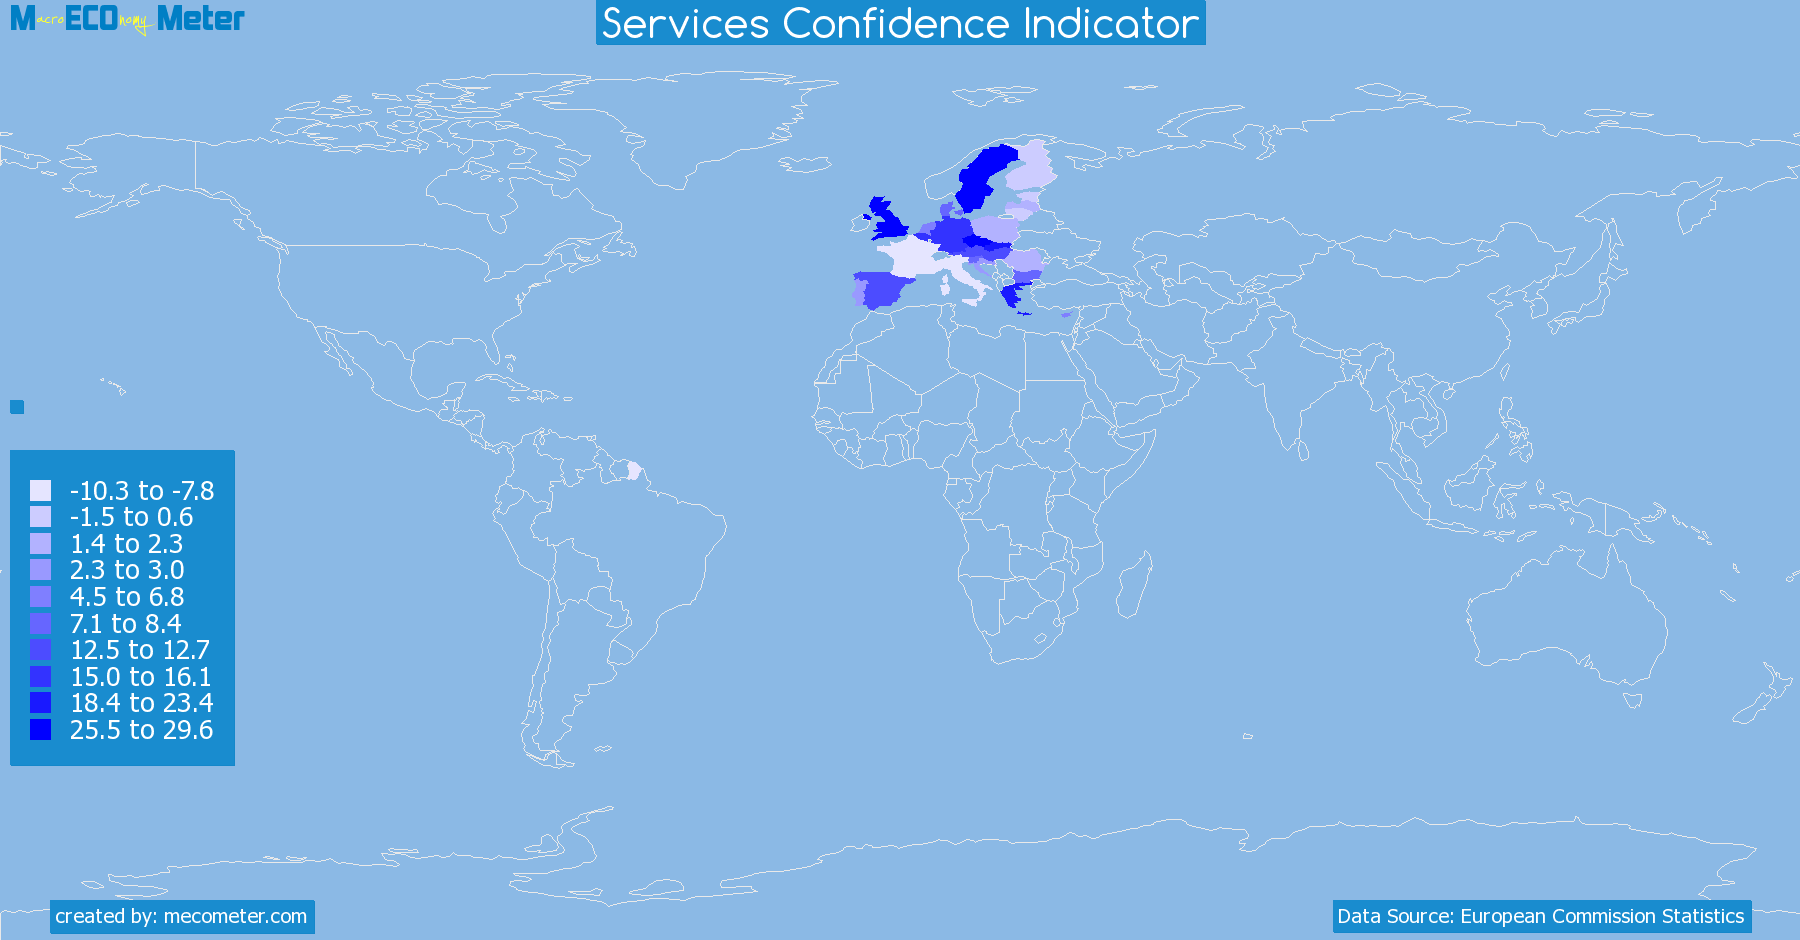 Services Confidence Indicator